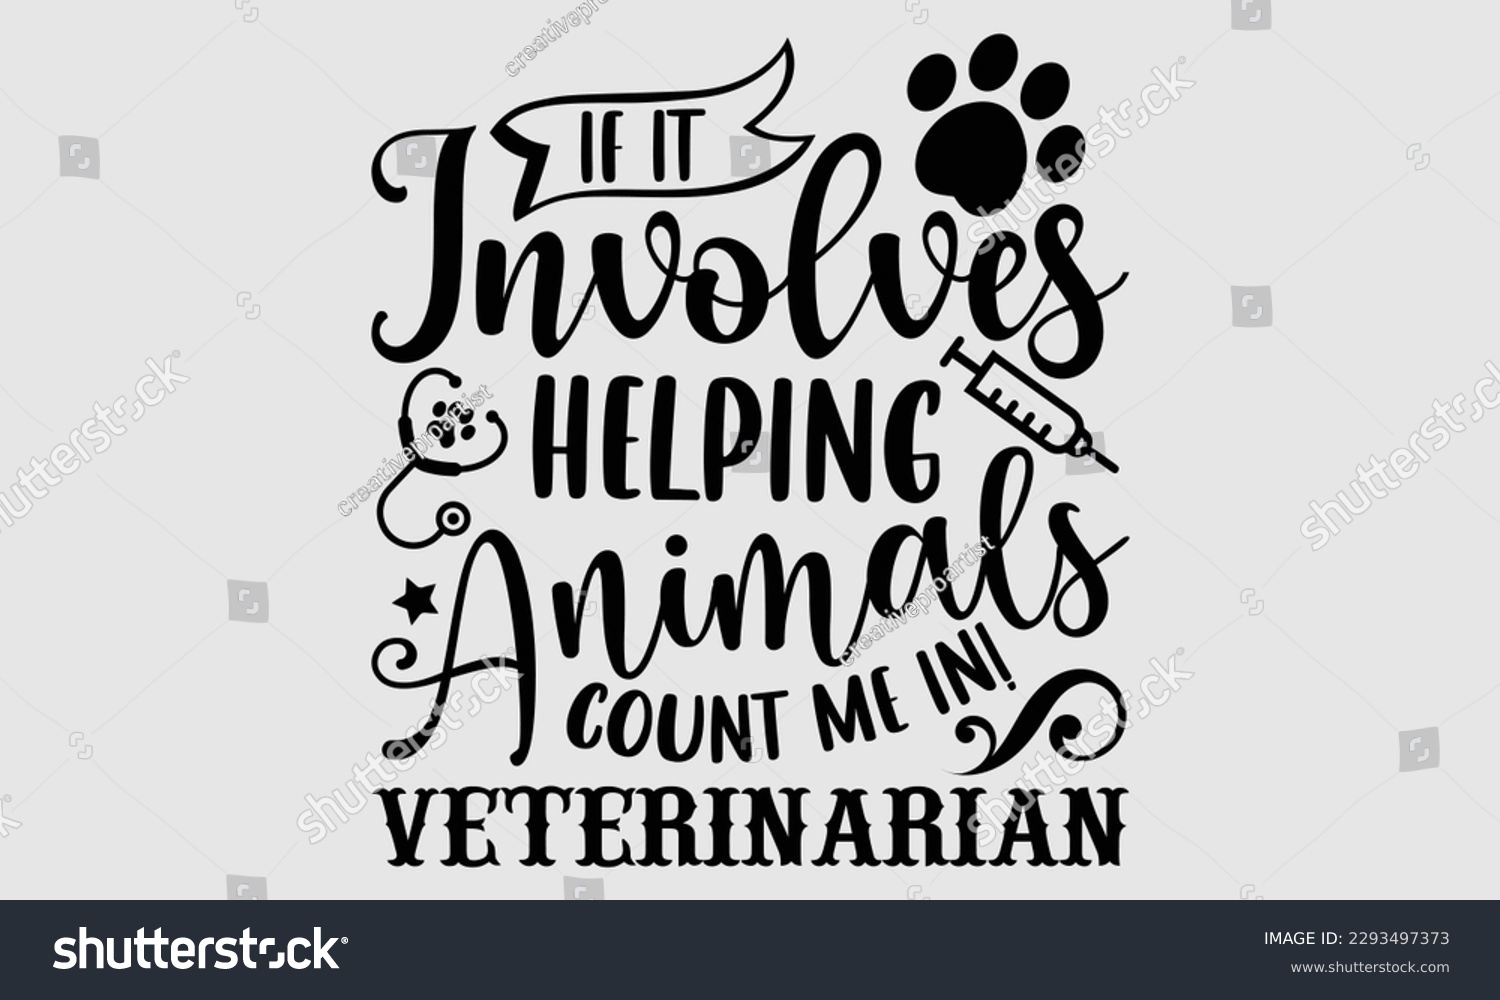 SVG of If it involves helping animals count me in! veterinarian- Veterinarian T-shirt Design, Hand written vector illustration, greeting card template with typography SVG Files for Cutting, bag, cups, card svg